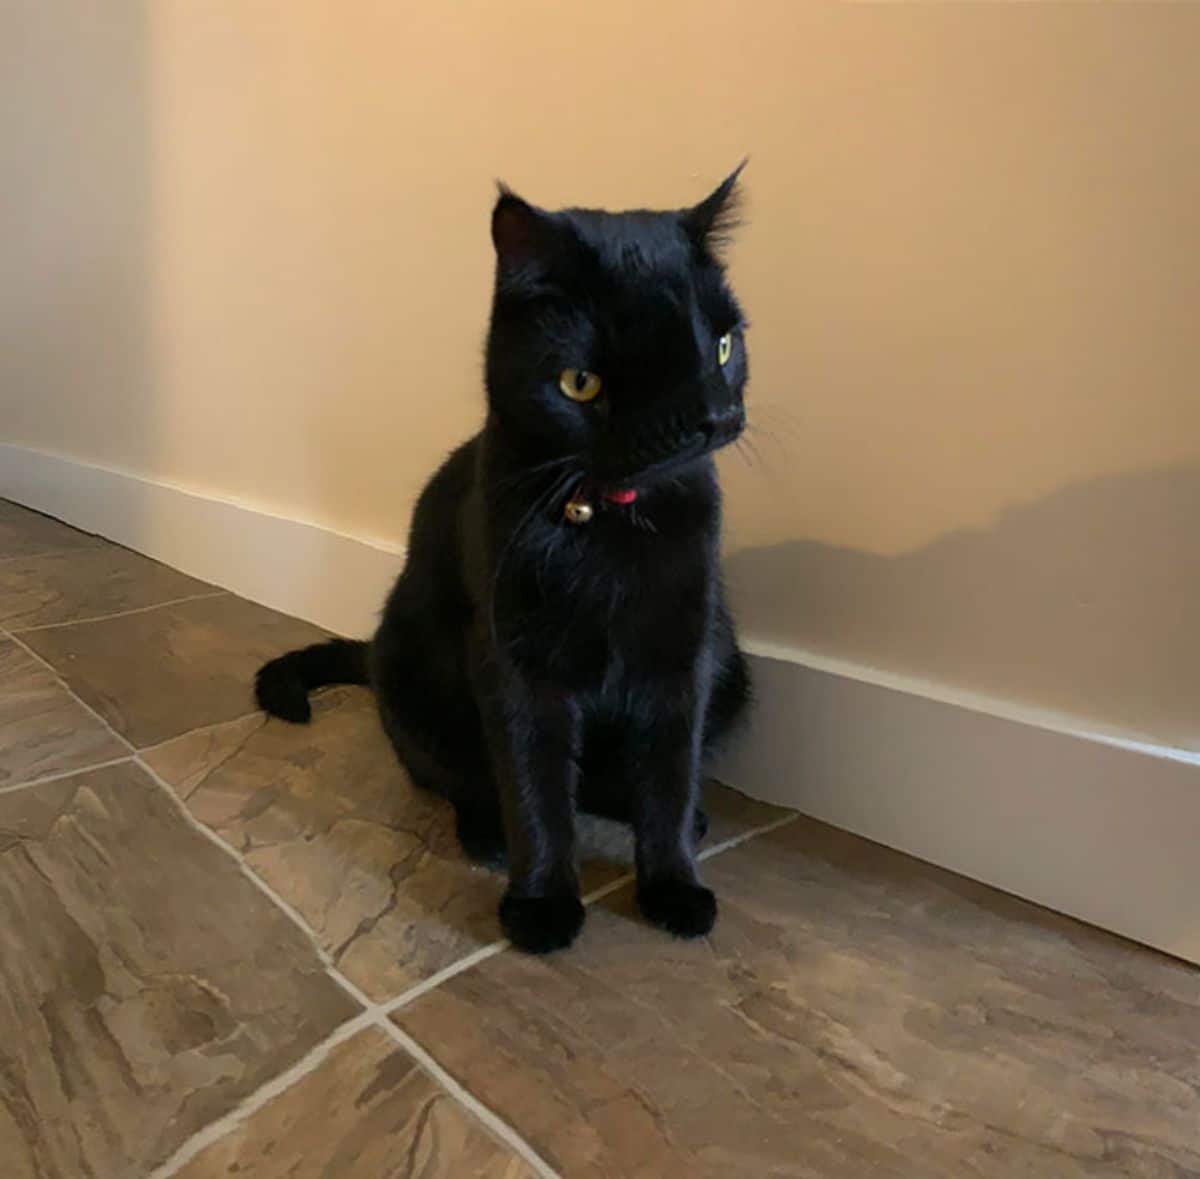 panoramic fail of black cat sitting on the floor with a large nose area and the eyes on either side of the head